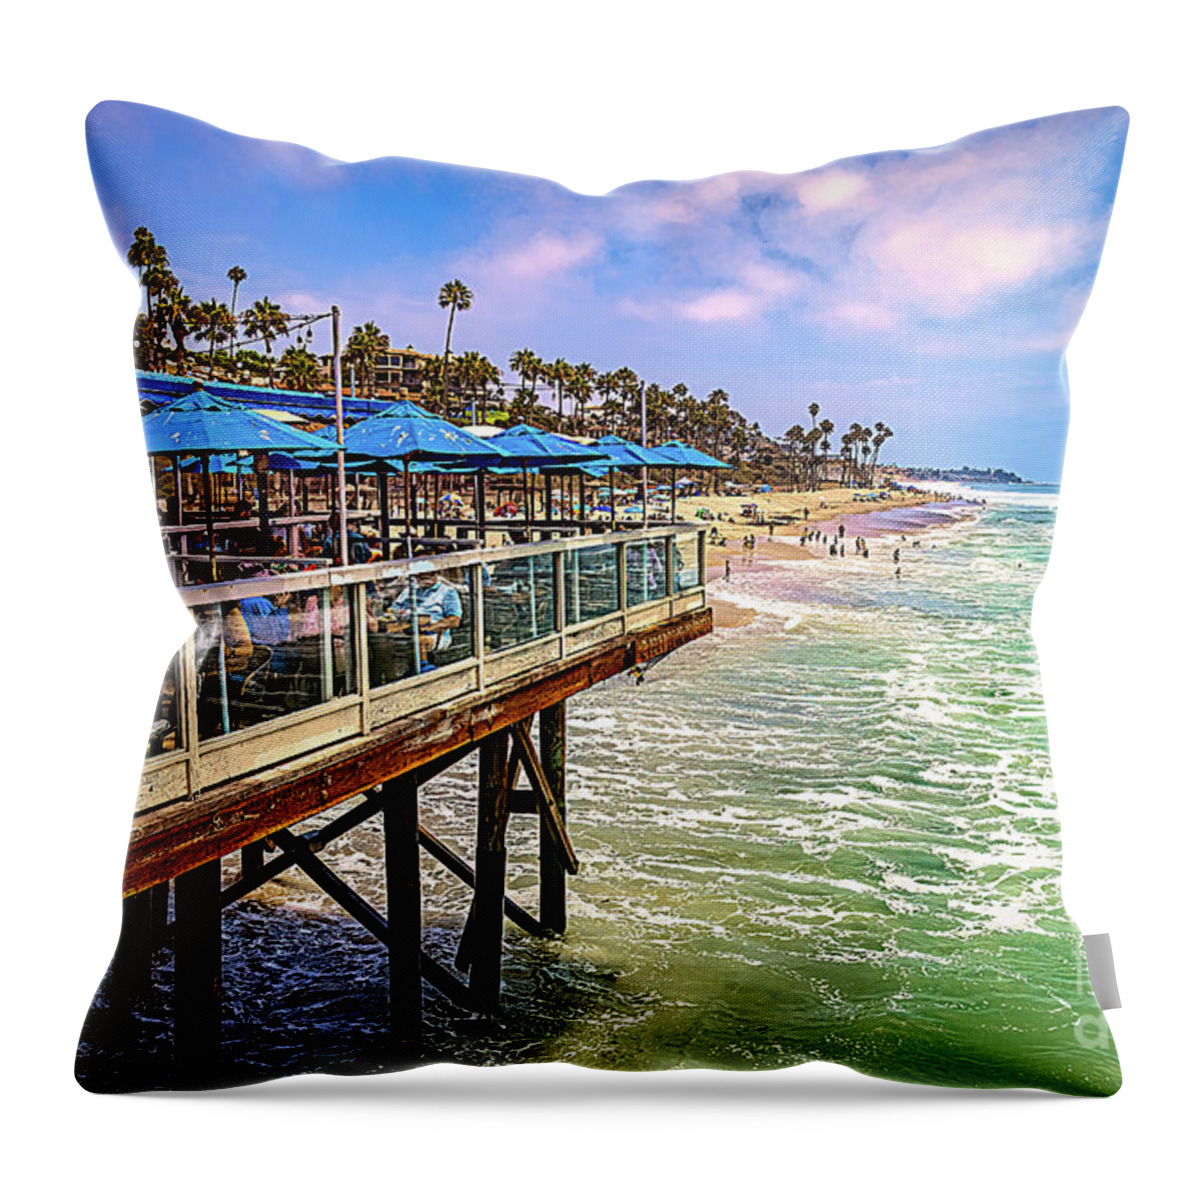 San Clemente Throw Pillow featuring the photograph San Clemente Pier with Blue Umbrellas by Roslyn Wilkins